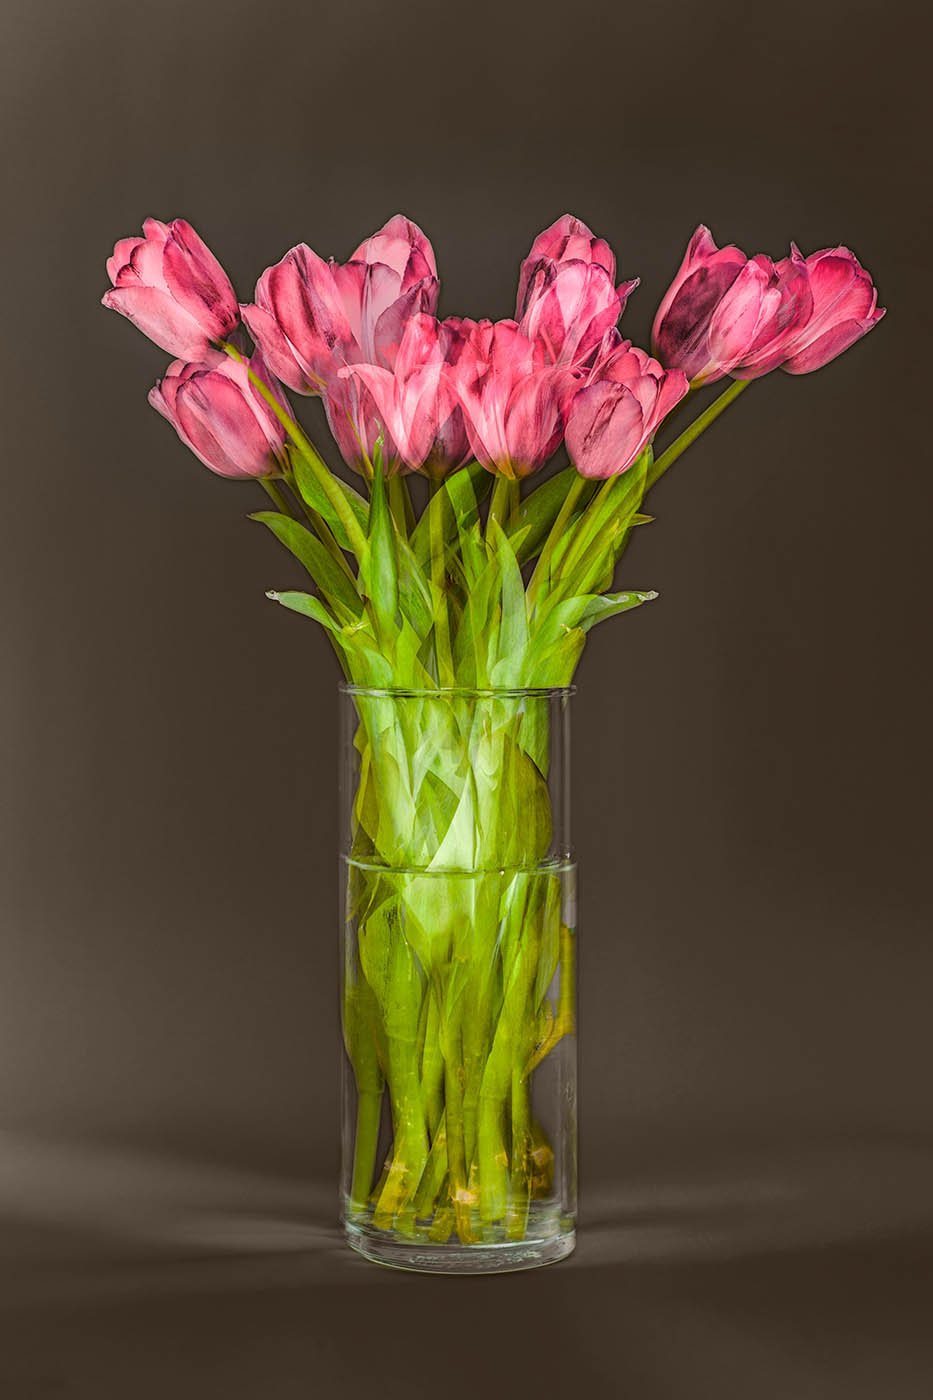 Tulips, Two by Pep Ventosa